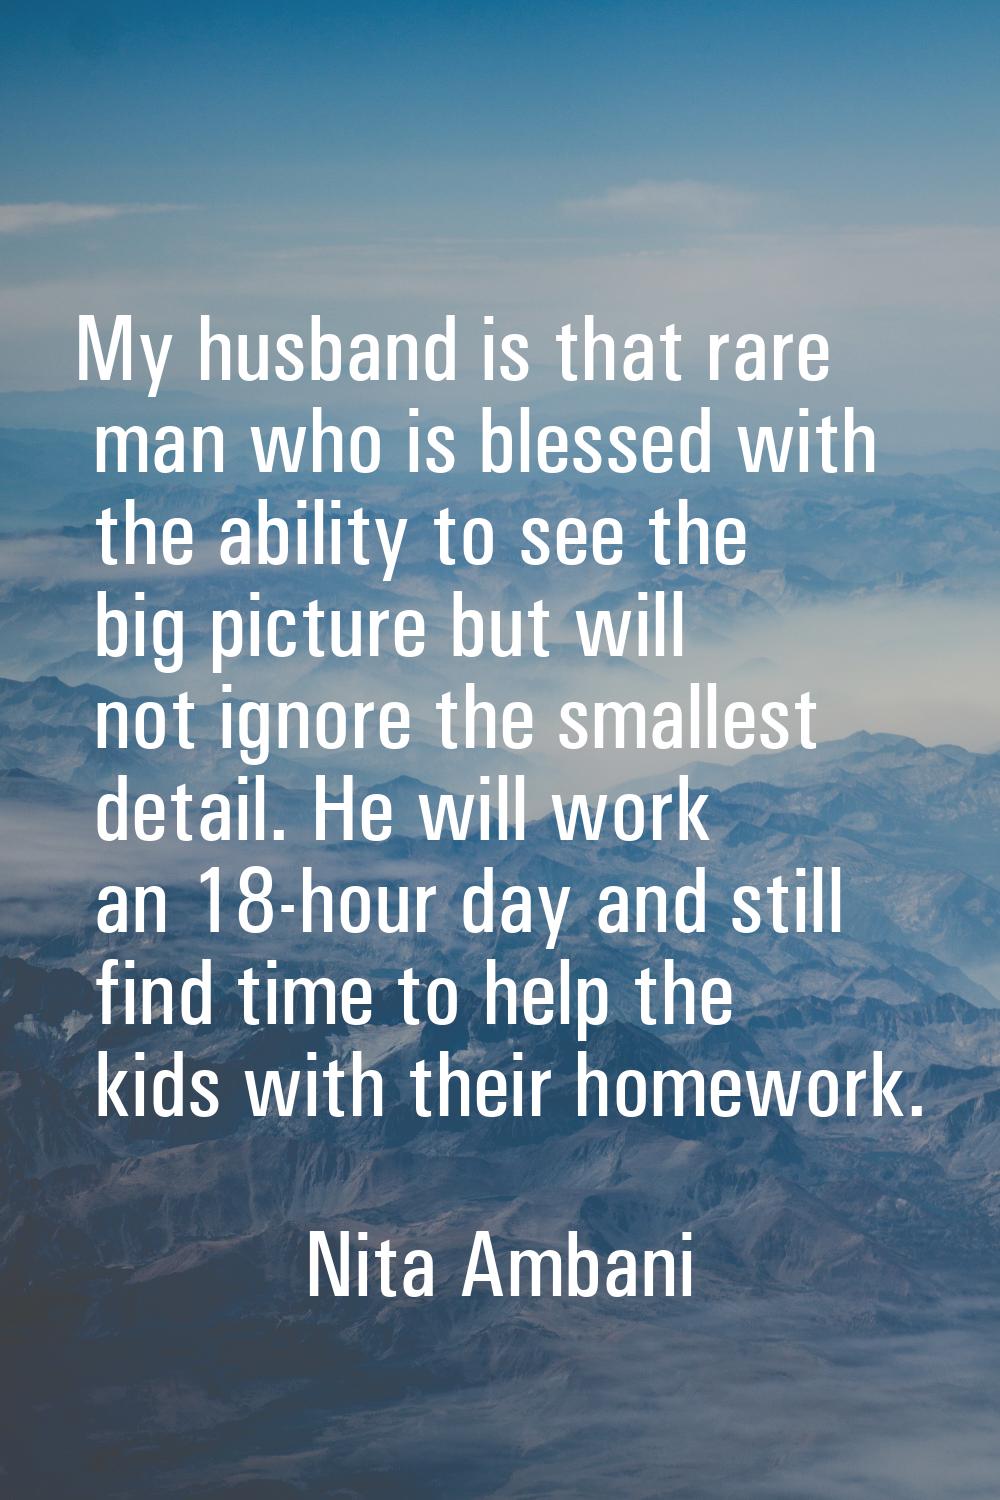 My husband is that rare man who is blessed with the ability to see the big picture but will not ign